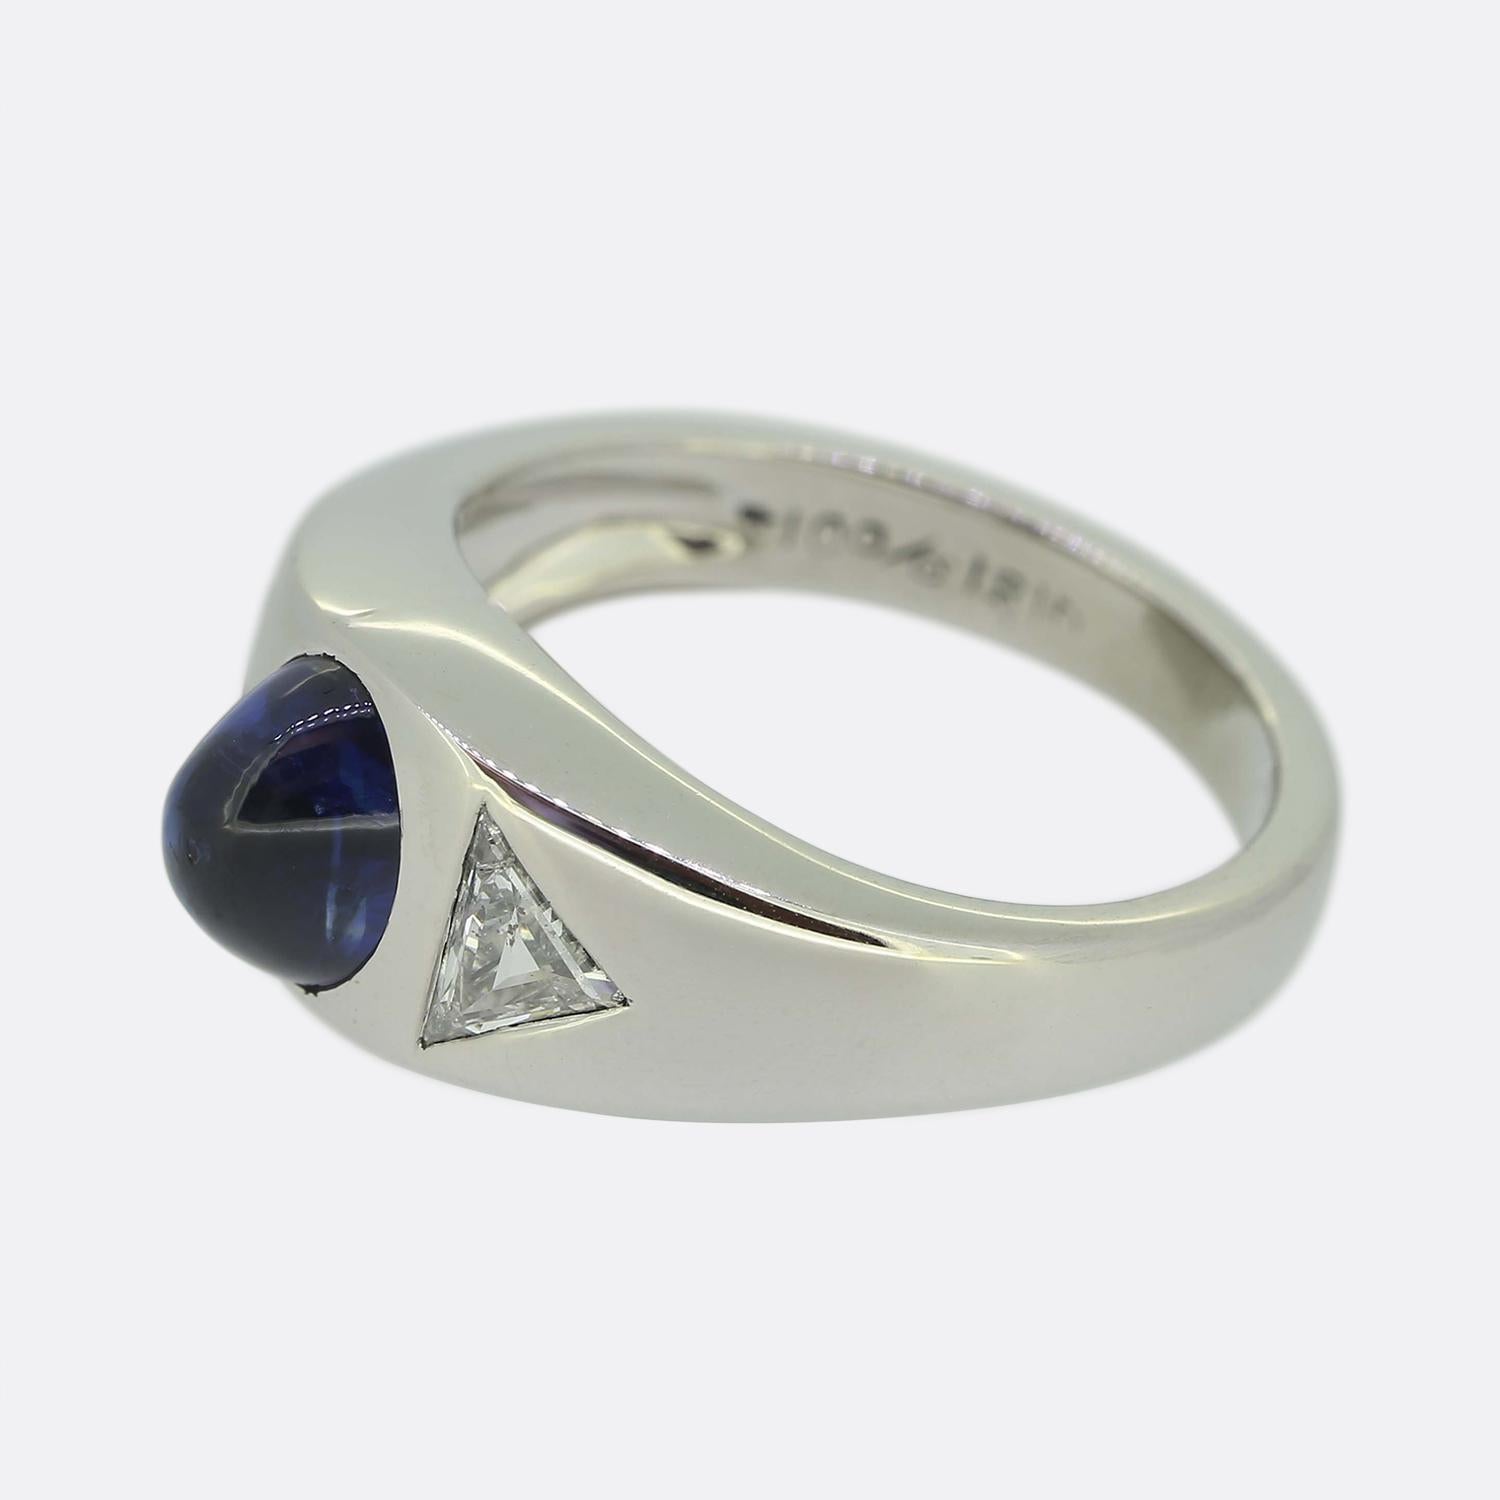 Here we have a sensational sapphire and diamond three-stone ring. Crafted from platinum, this Art Deco ring features a cabochon sapphire and two trilliant cut diamonds.

Condition: Used (Excellent)
Weight: 7.0 grams
Ring Size: I (48)
Band Width: 8mm